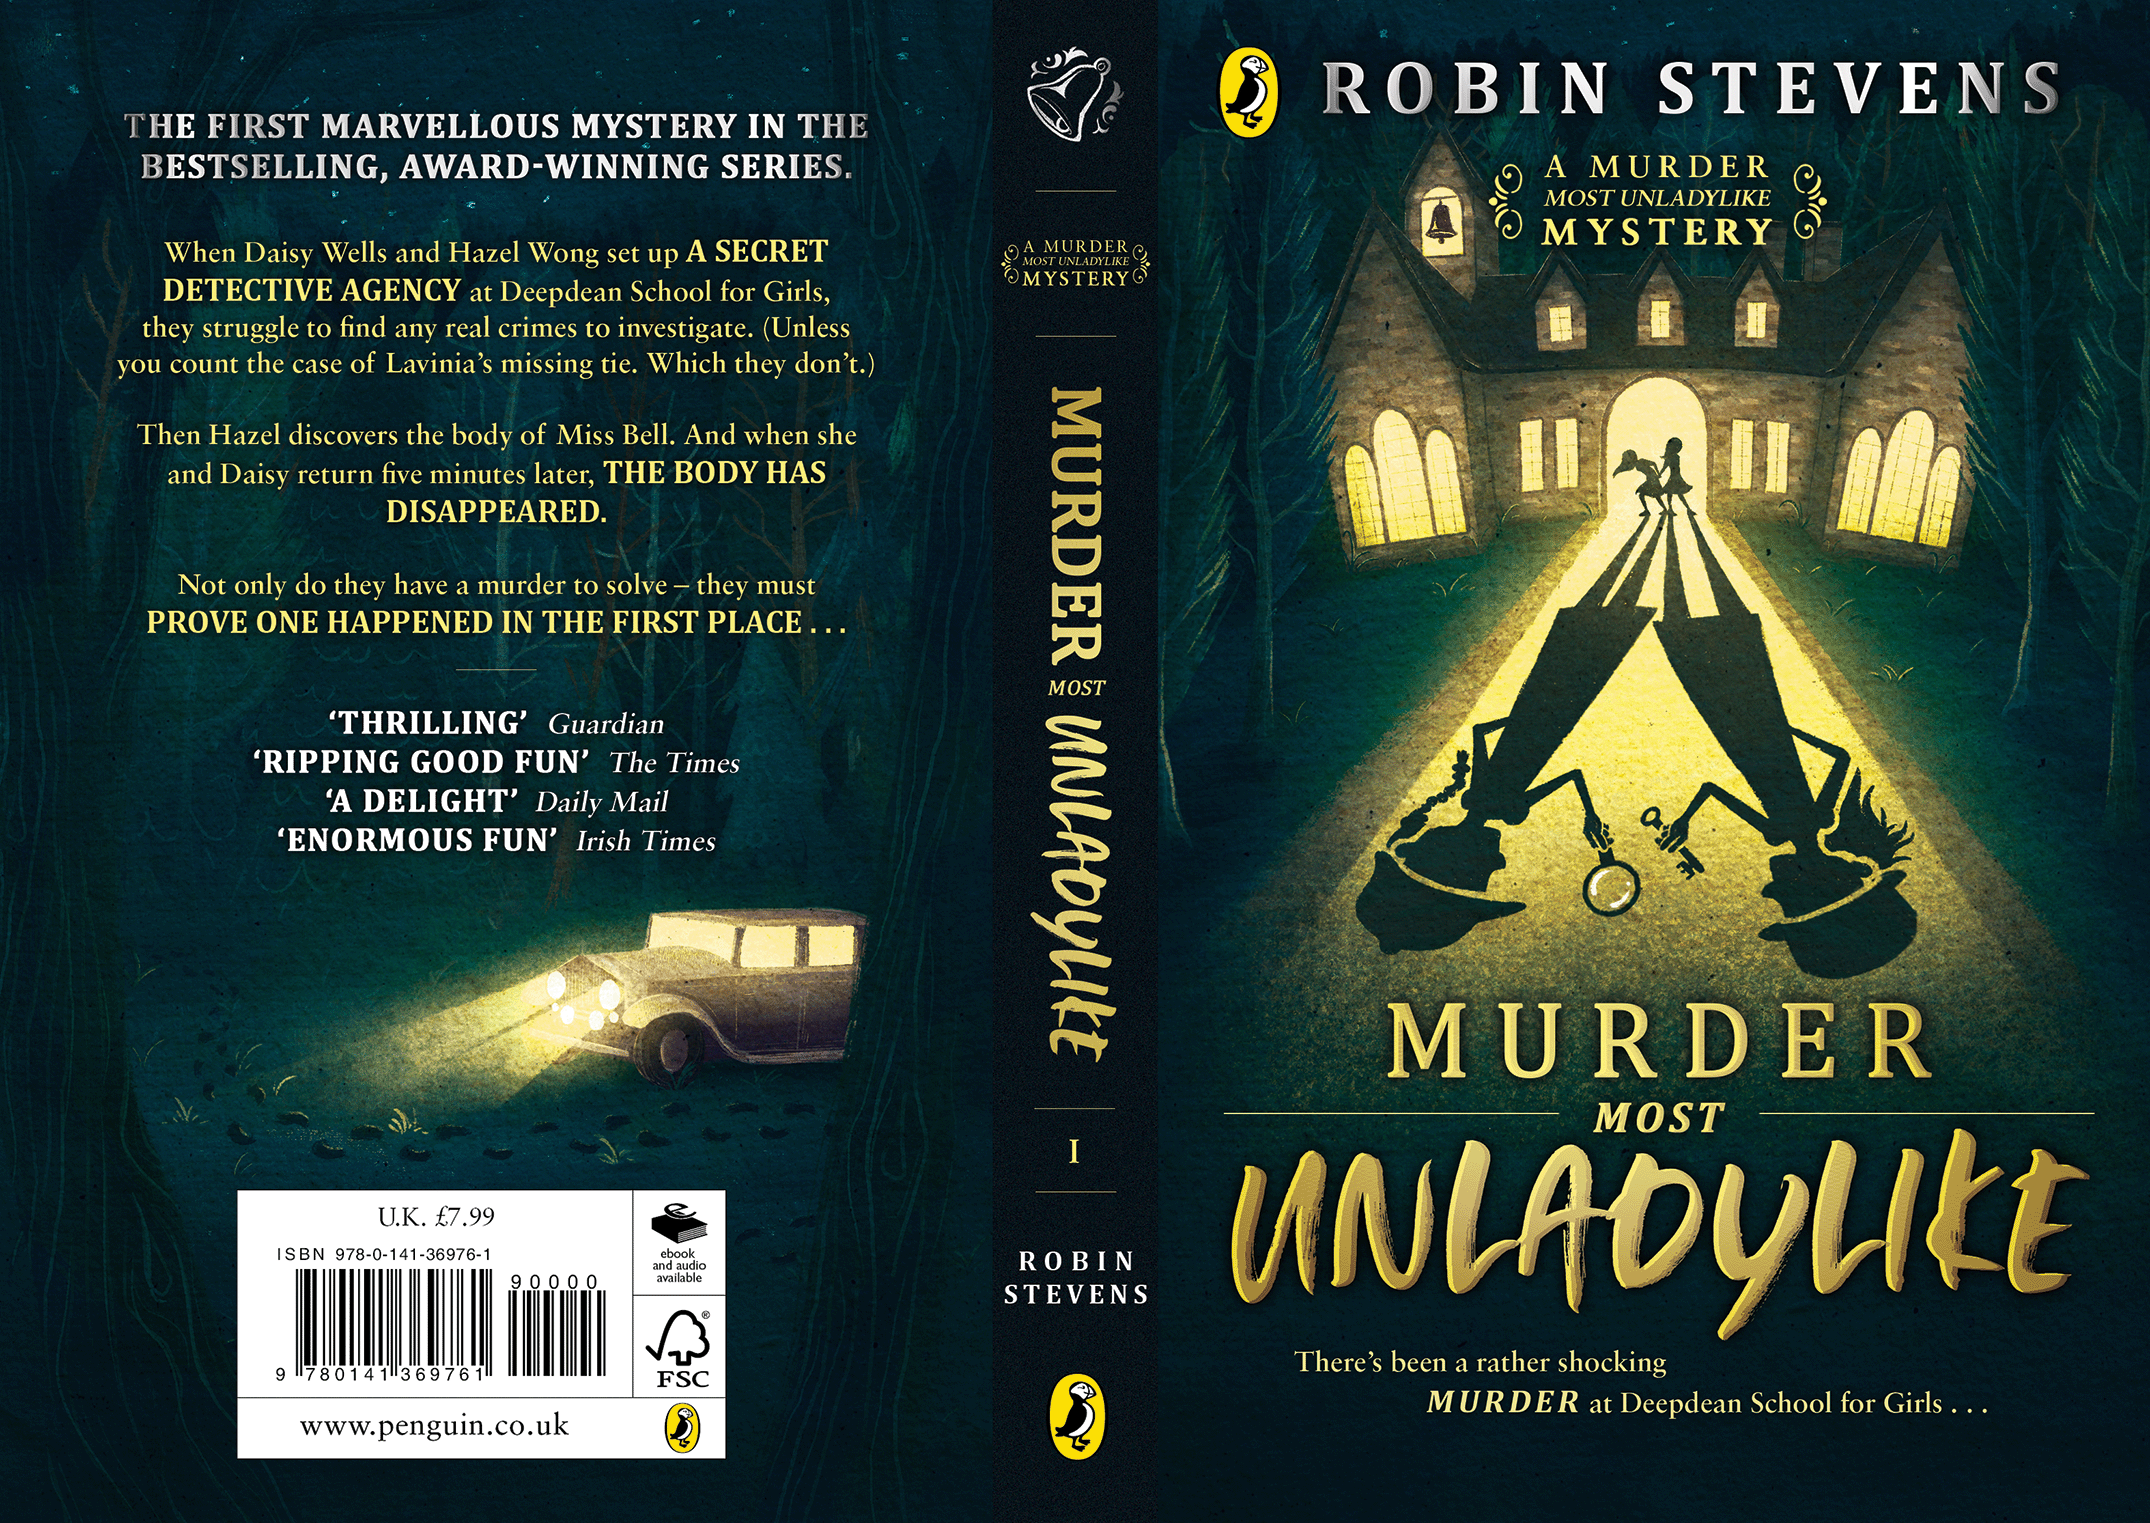 Murder Most Unladylike book cover by Georgie McAndrew for the Penguin Cover Design Award 2022.